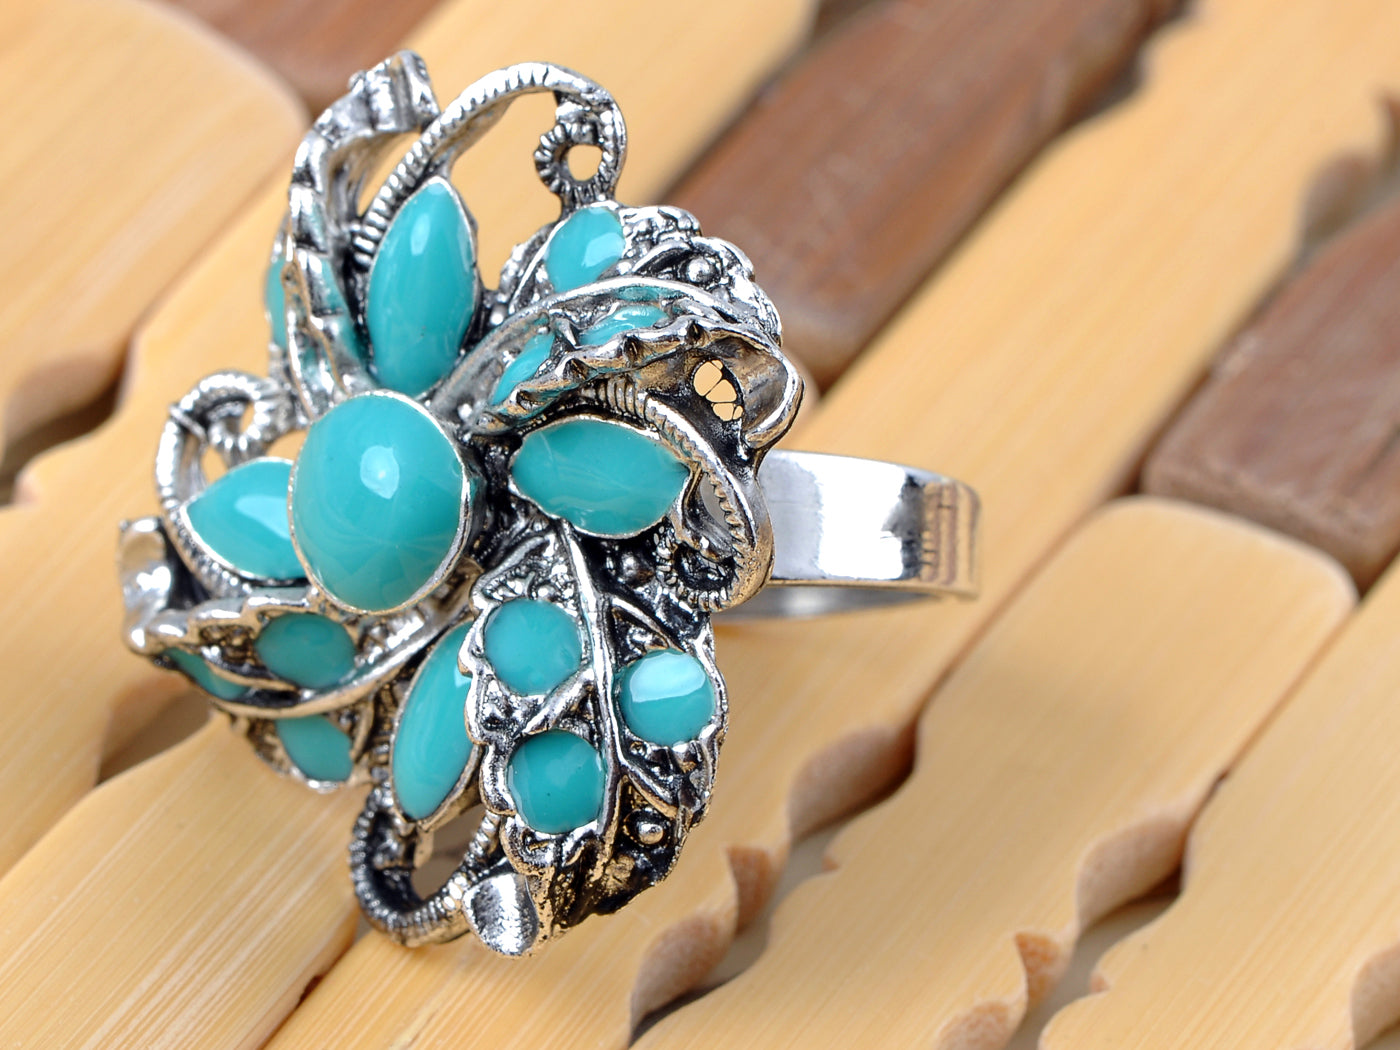 Turquoise Abstract Floral Flower Ring